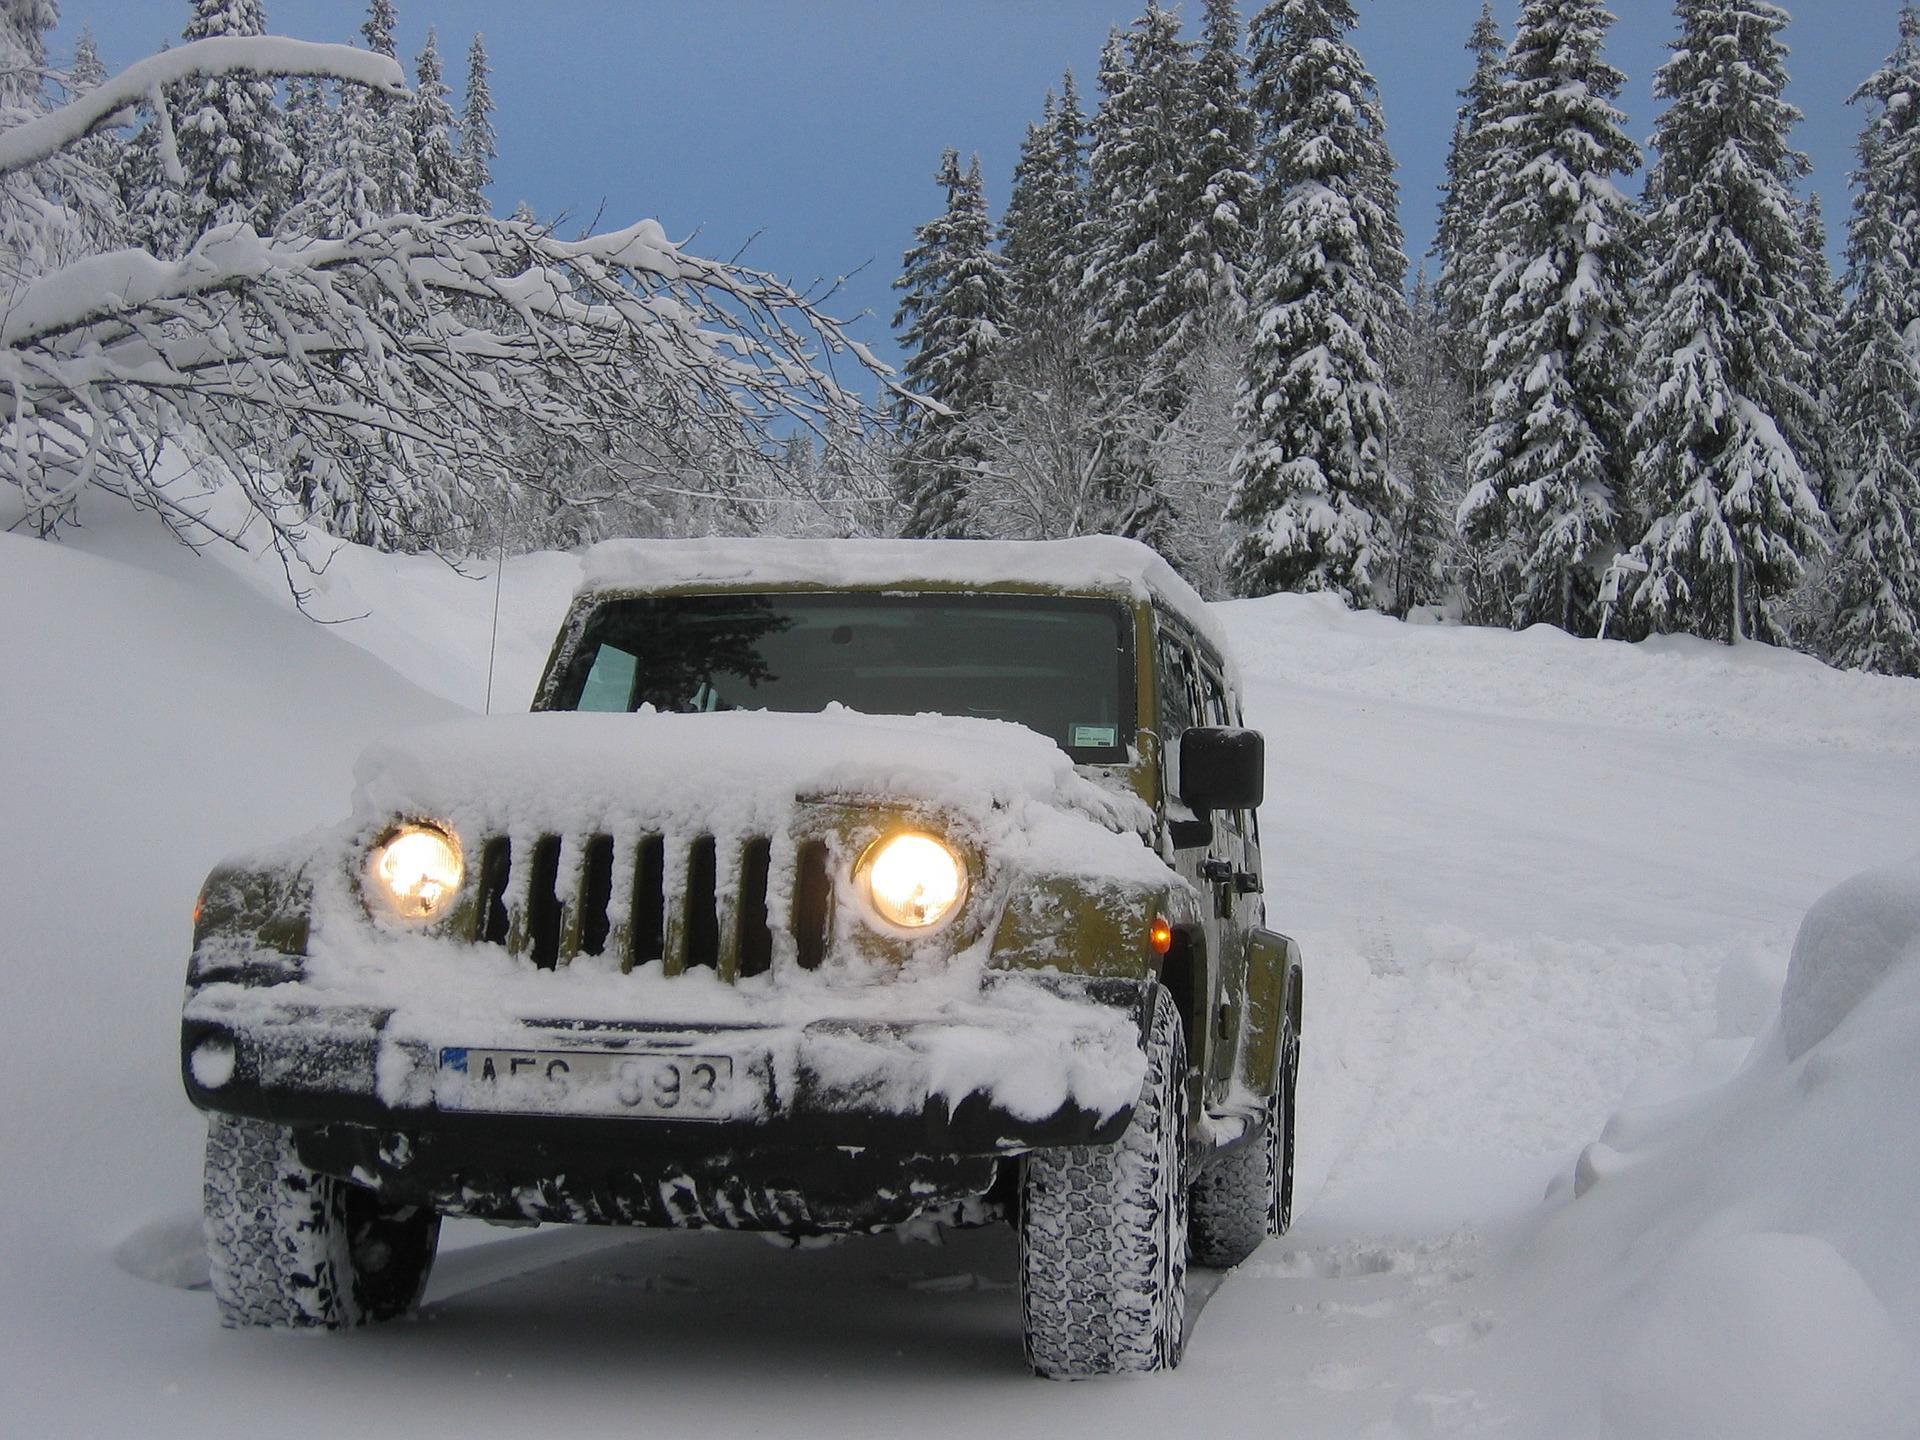 A Jeep Wrangler in the snow